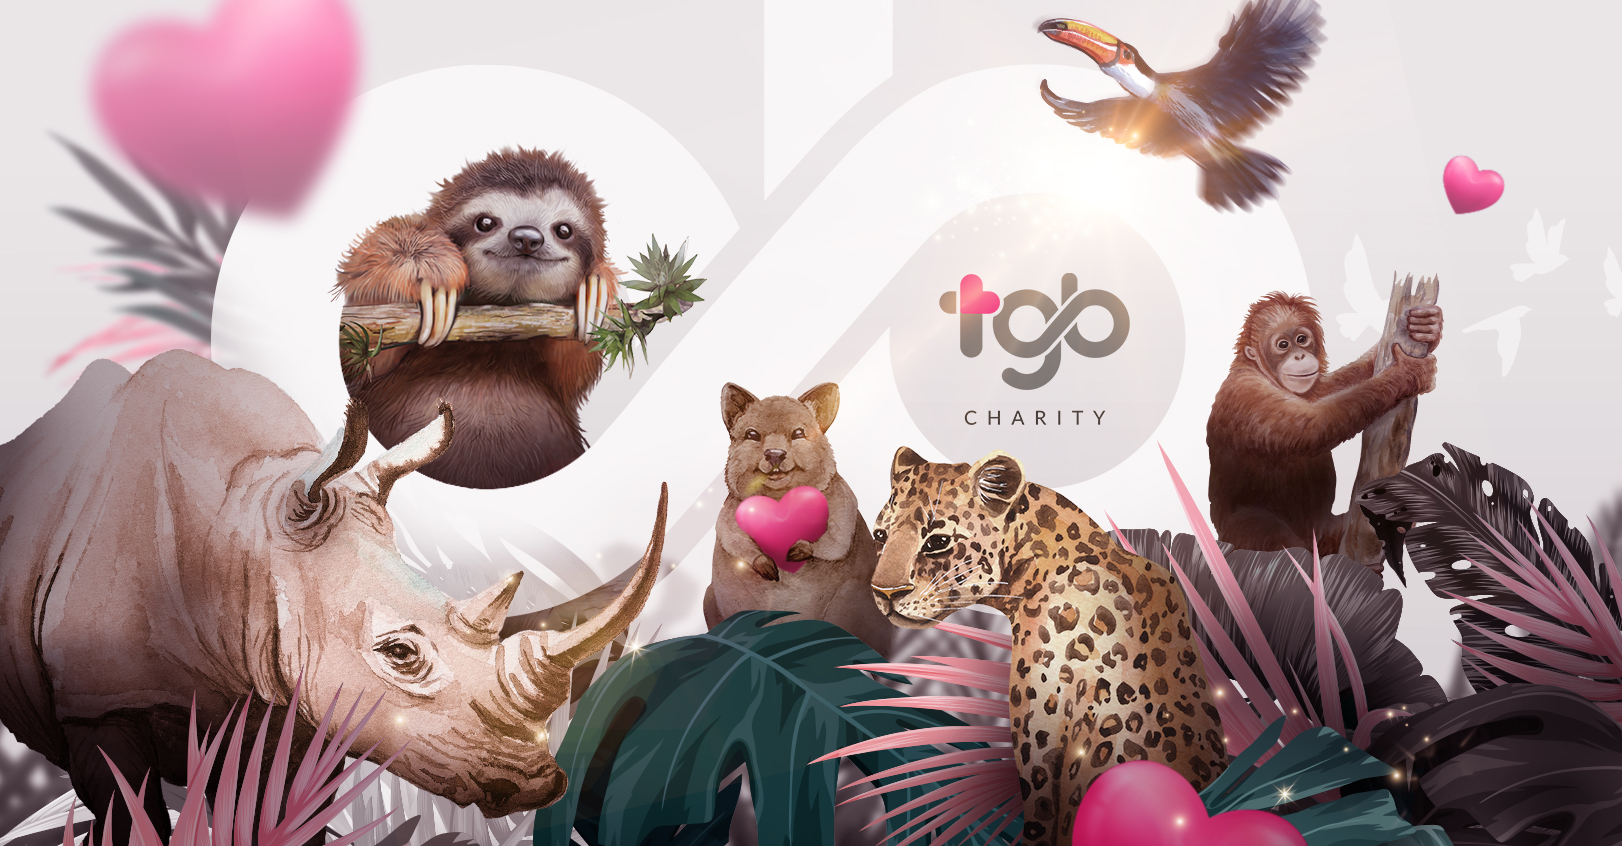 TGB Charity - All creatures on Earth are connected. Love For All Kinds